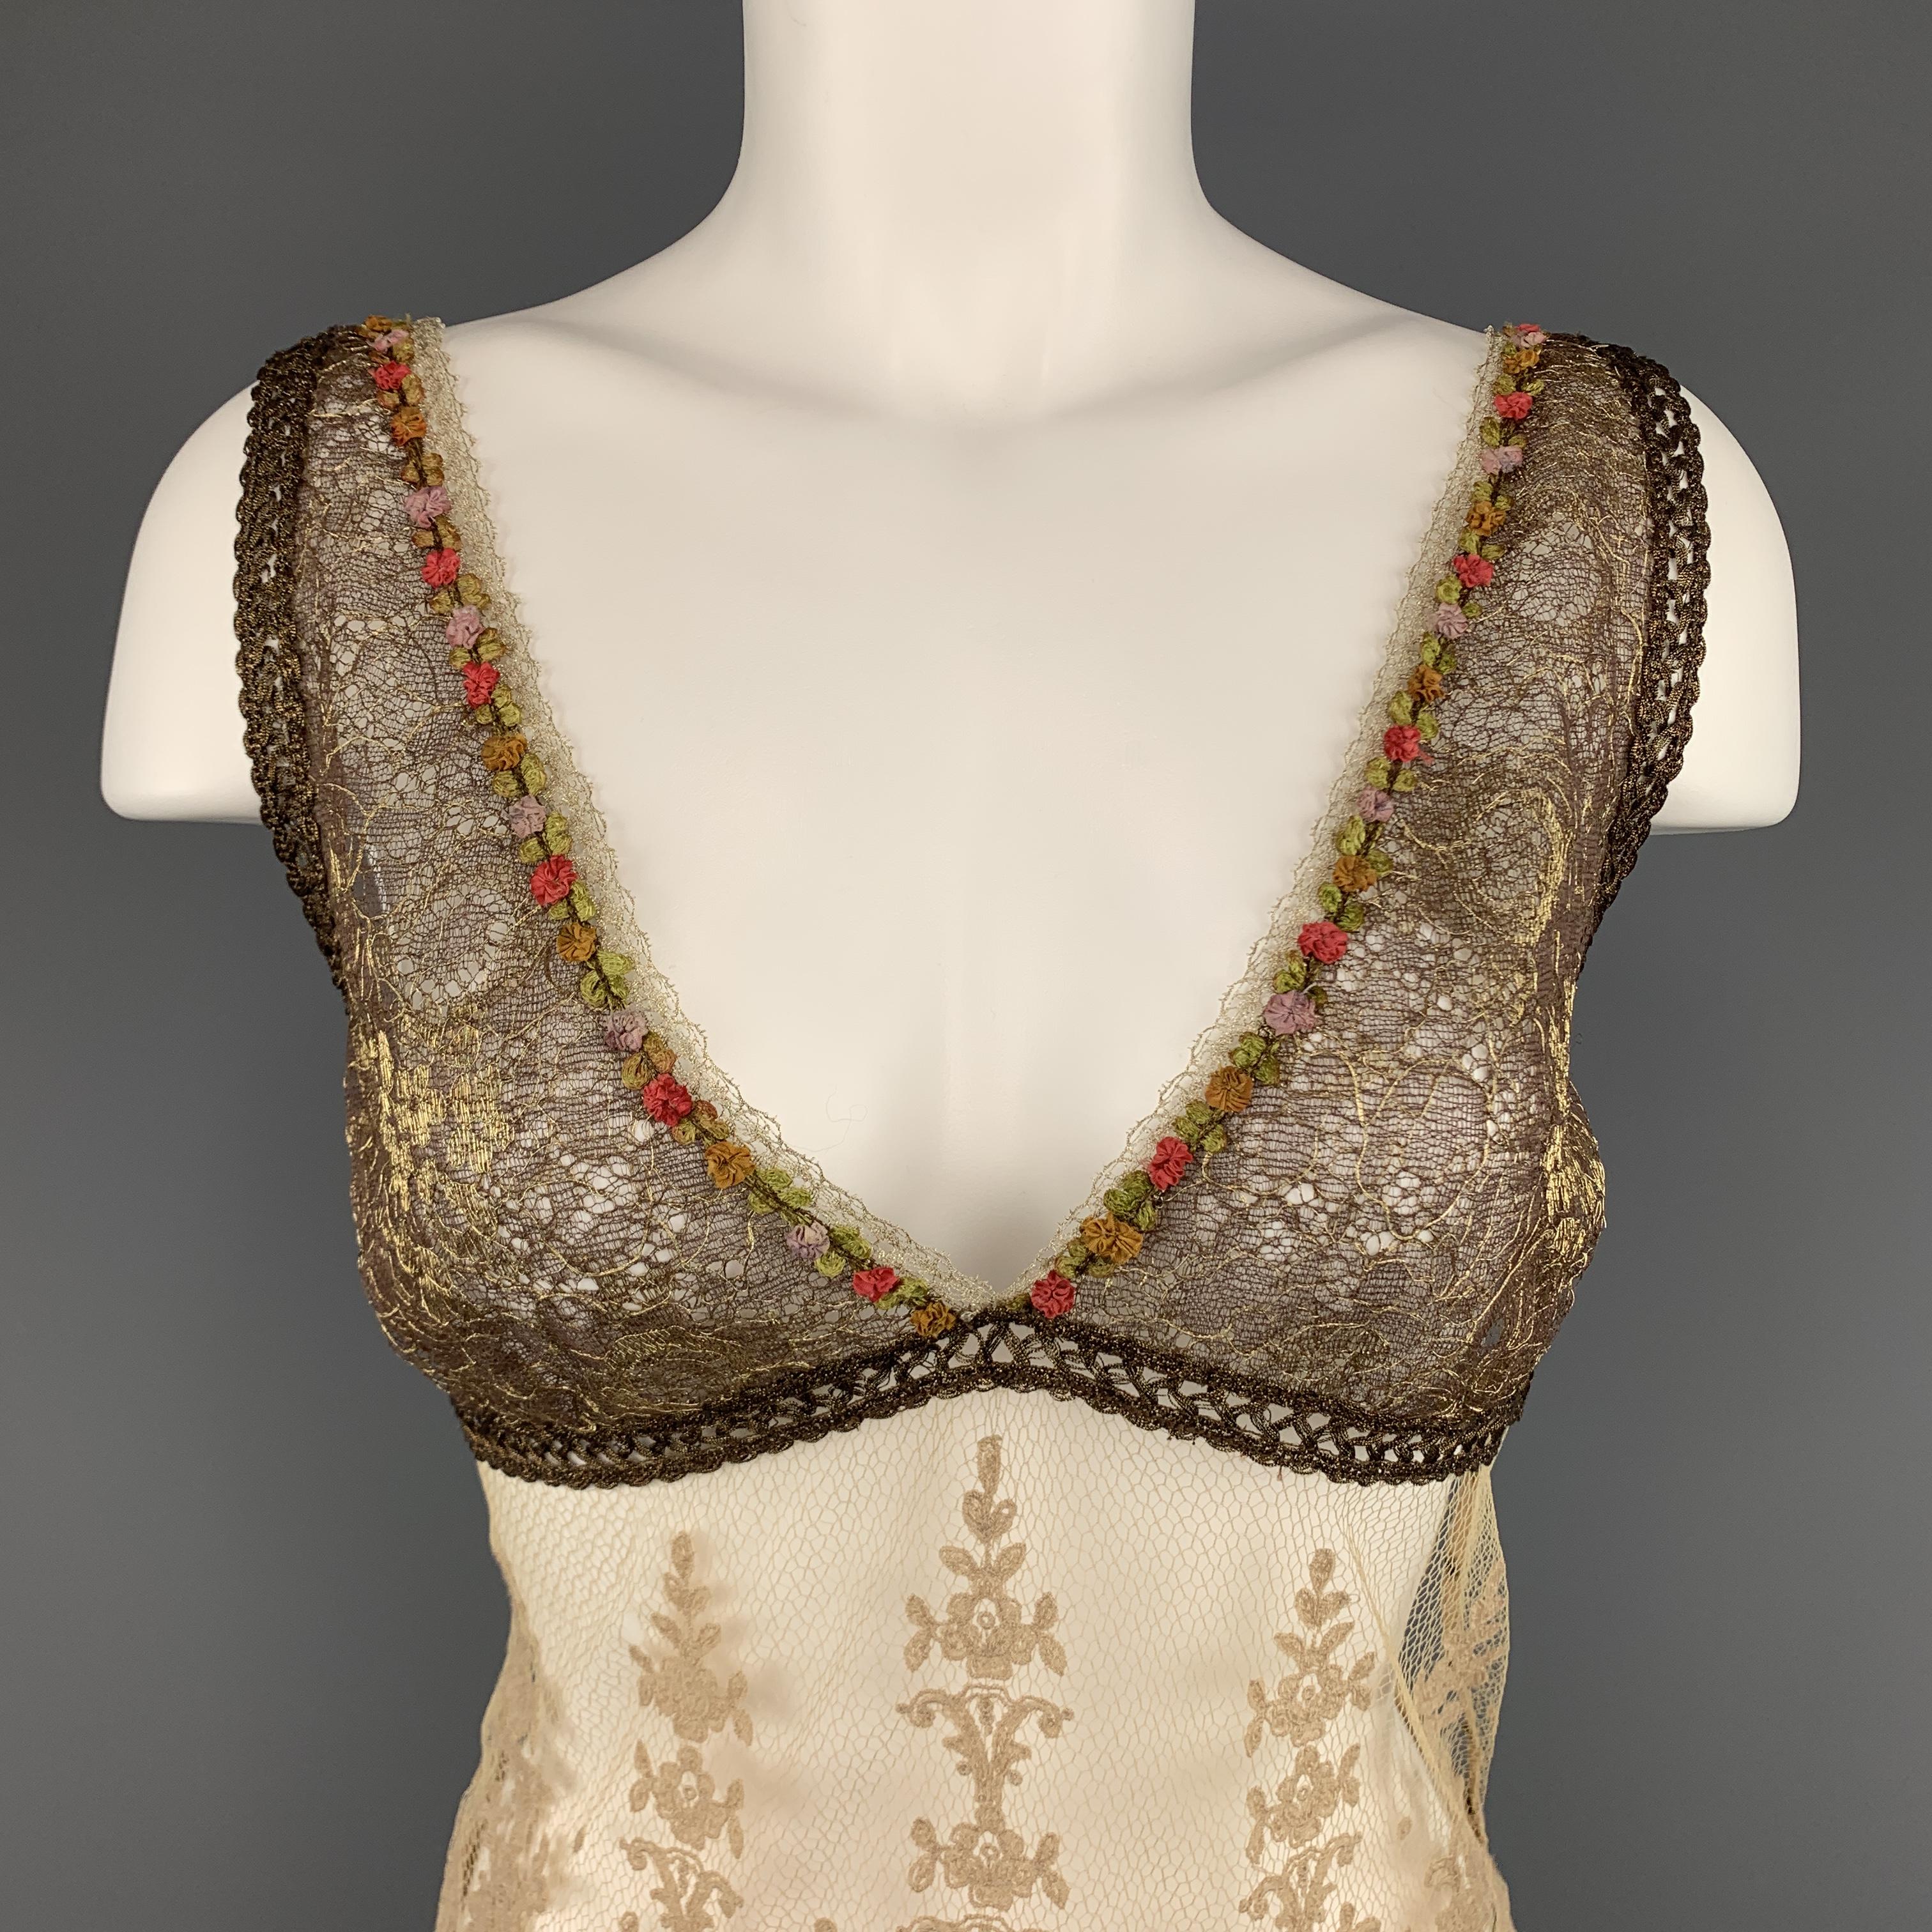 RALPH LAUREN blue label camisole top features a metallic gold bronze lace top with multi color floral applique trim, deep V neck line, and beige lace body.
 
Excellent Pre-Owned Condition.
Marked: 6
 
Measurements:
 
Shoulder: 14 in.
Bust: 34